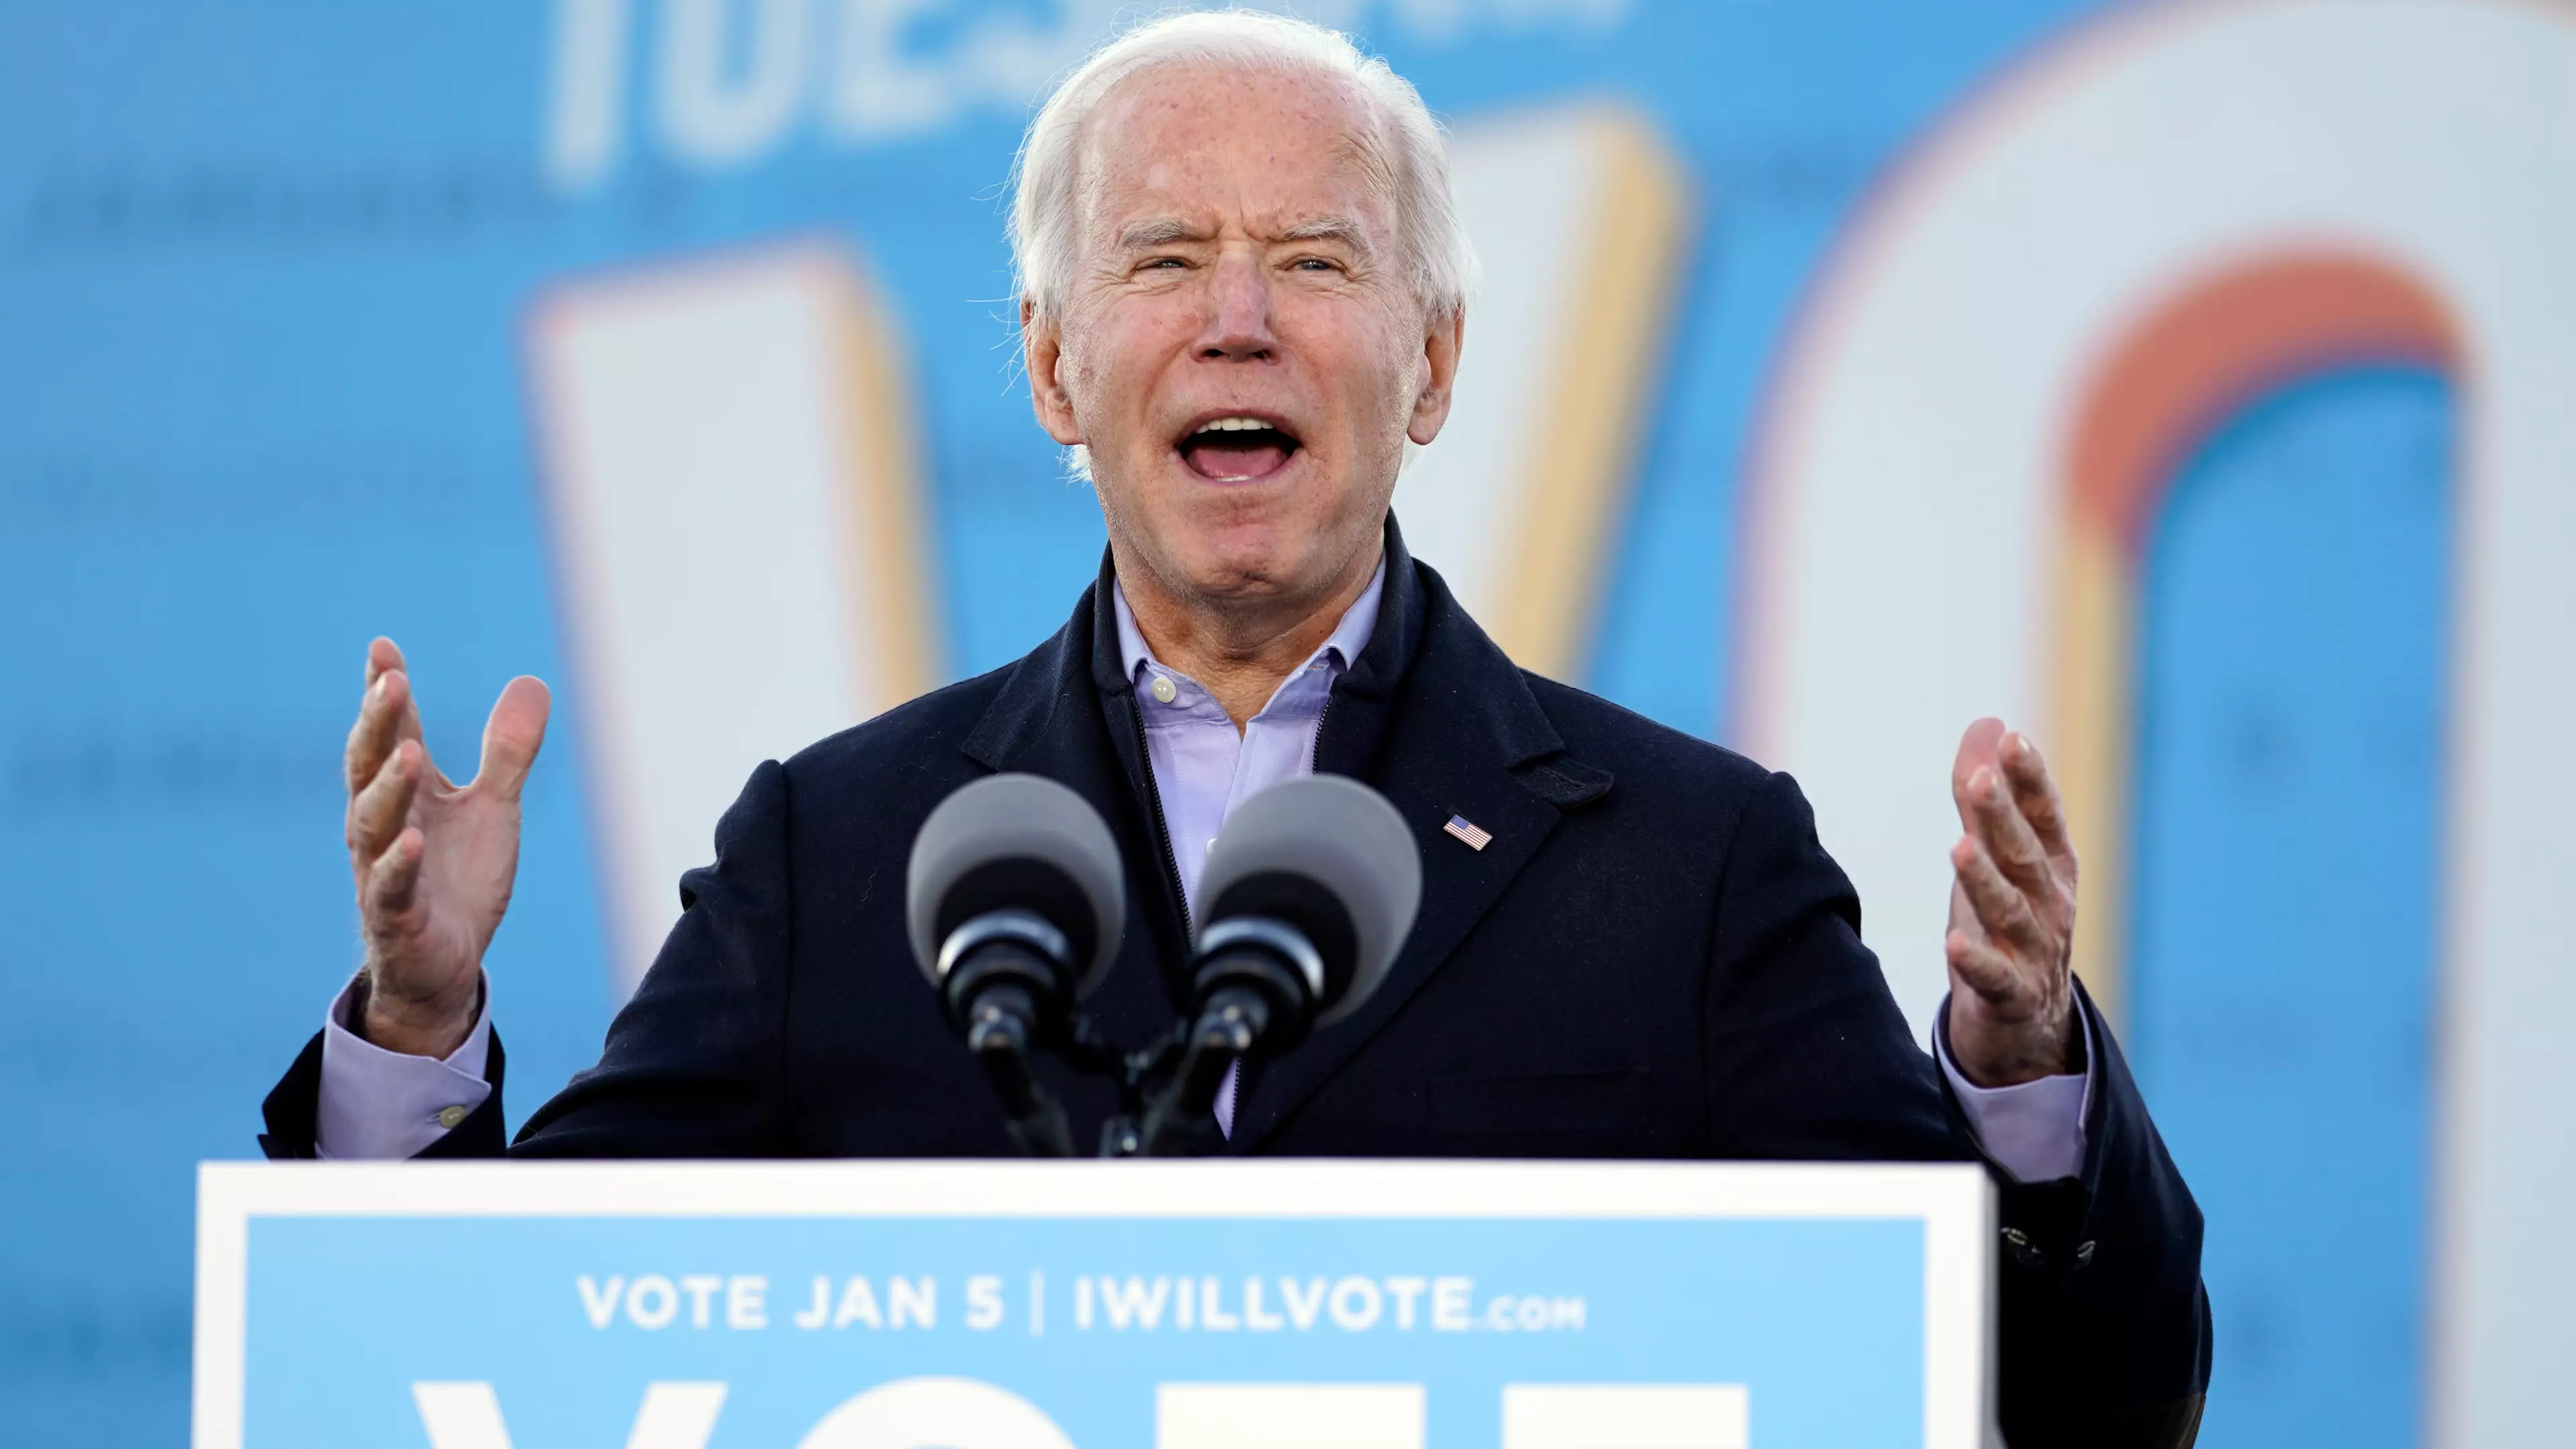 Joe Biden Has Officially Been Confirmed As The Next President Of The United States